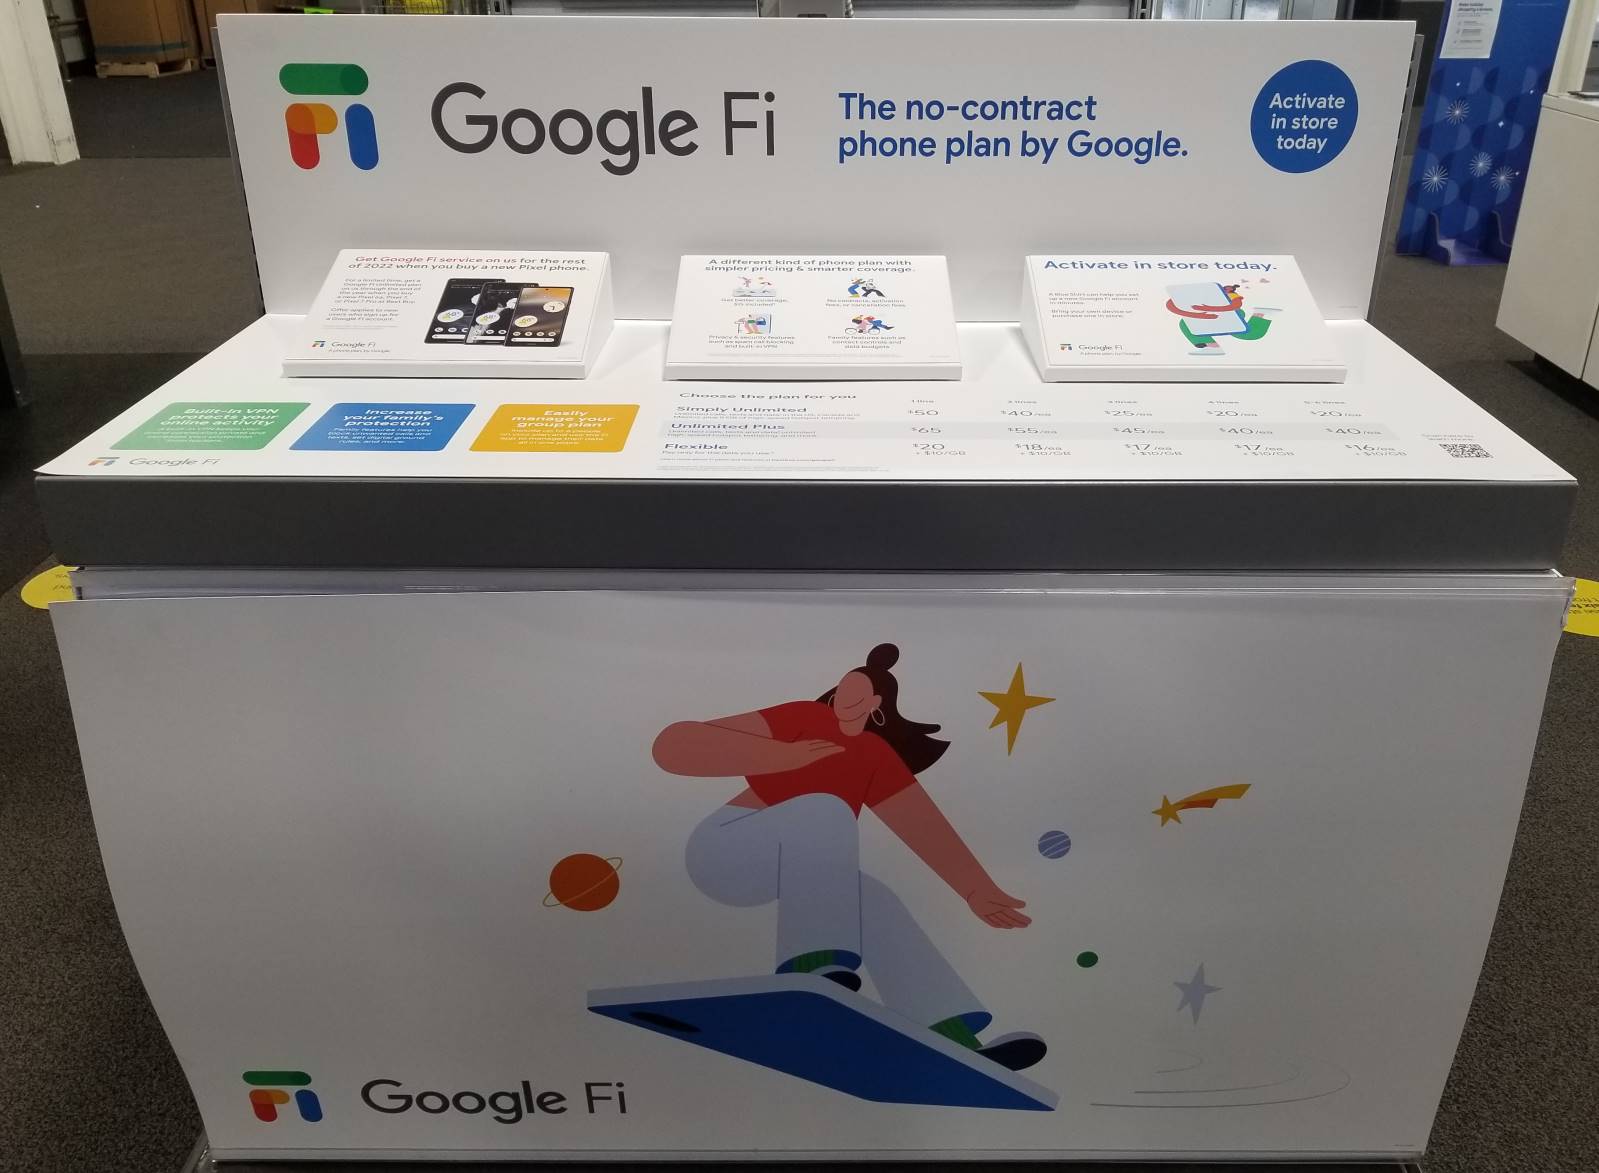 Google Fi Display At Best Buy With Free Service Details